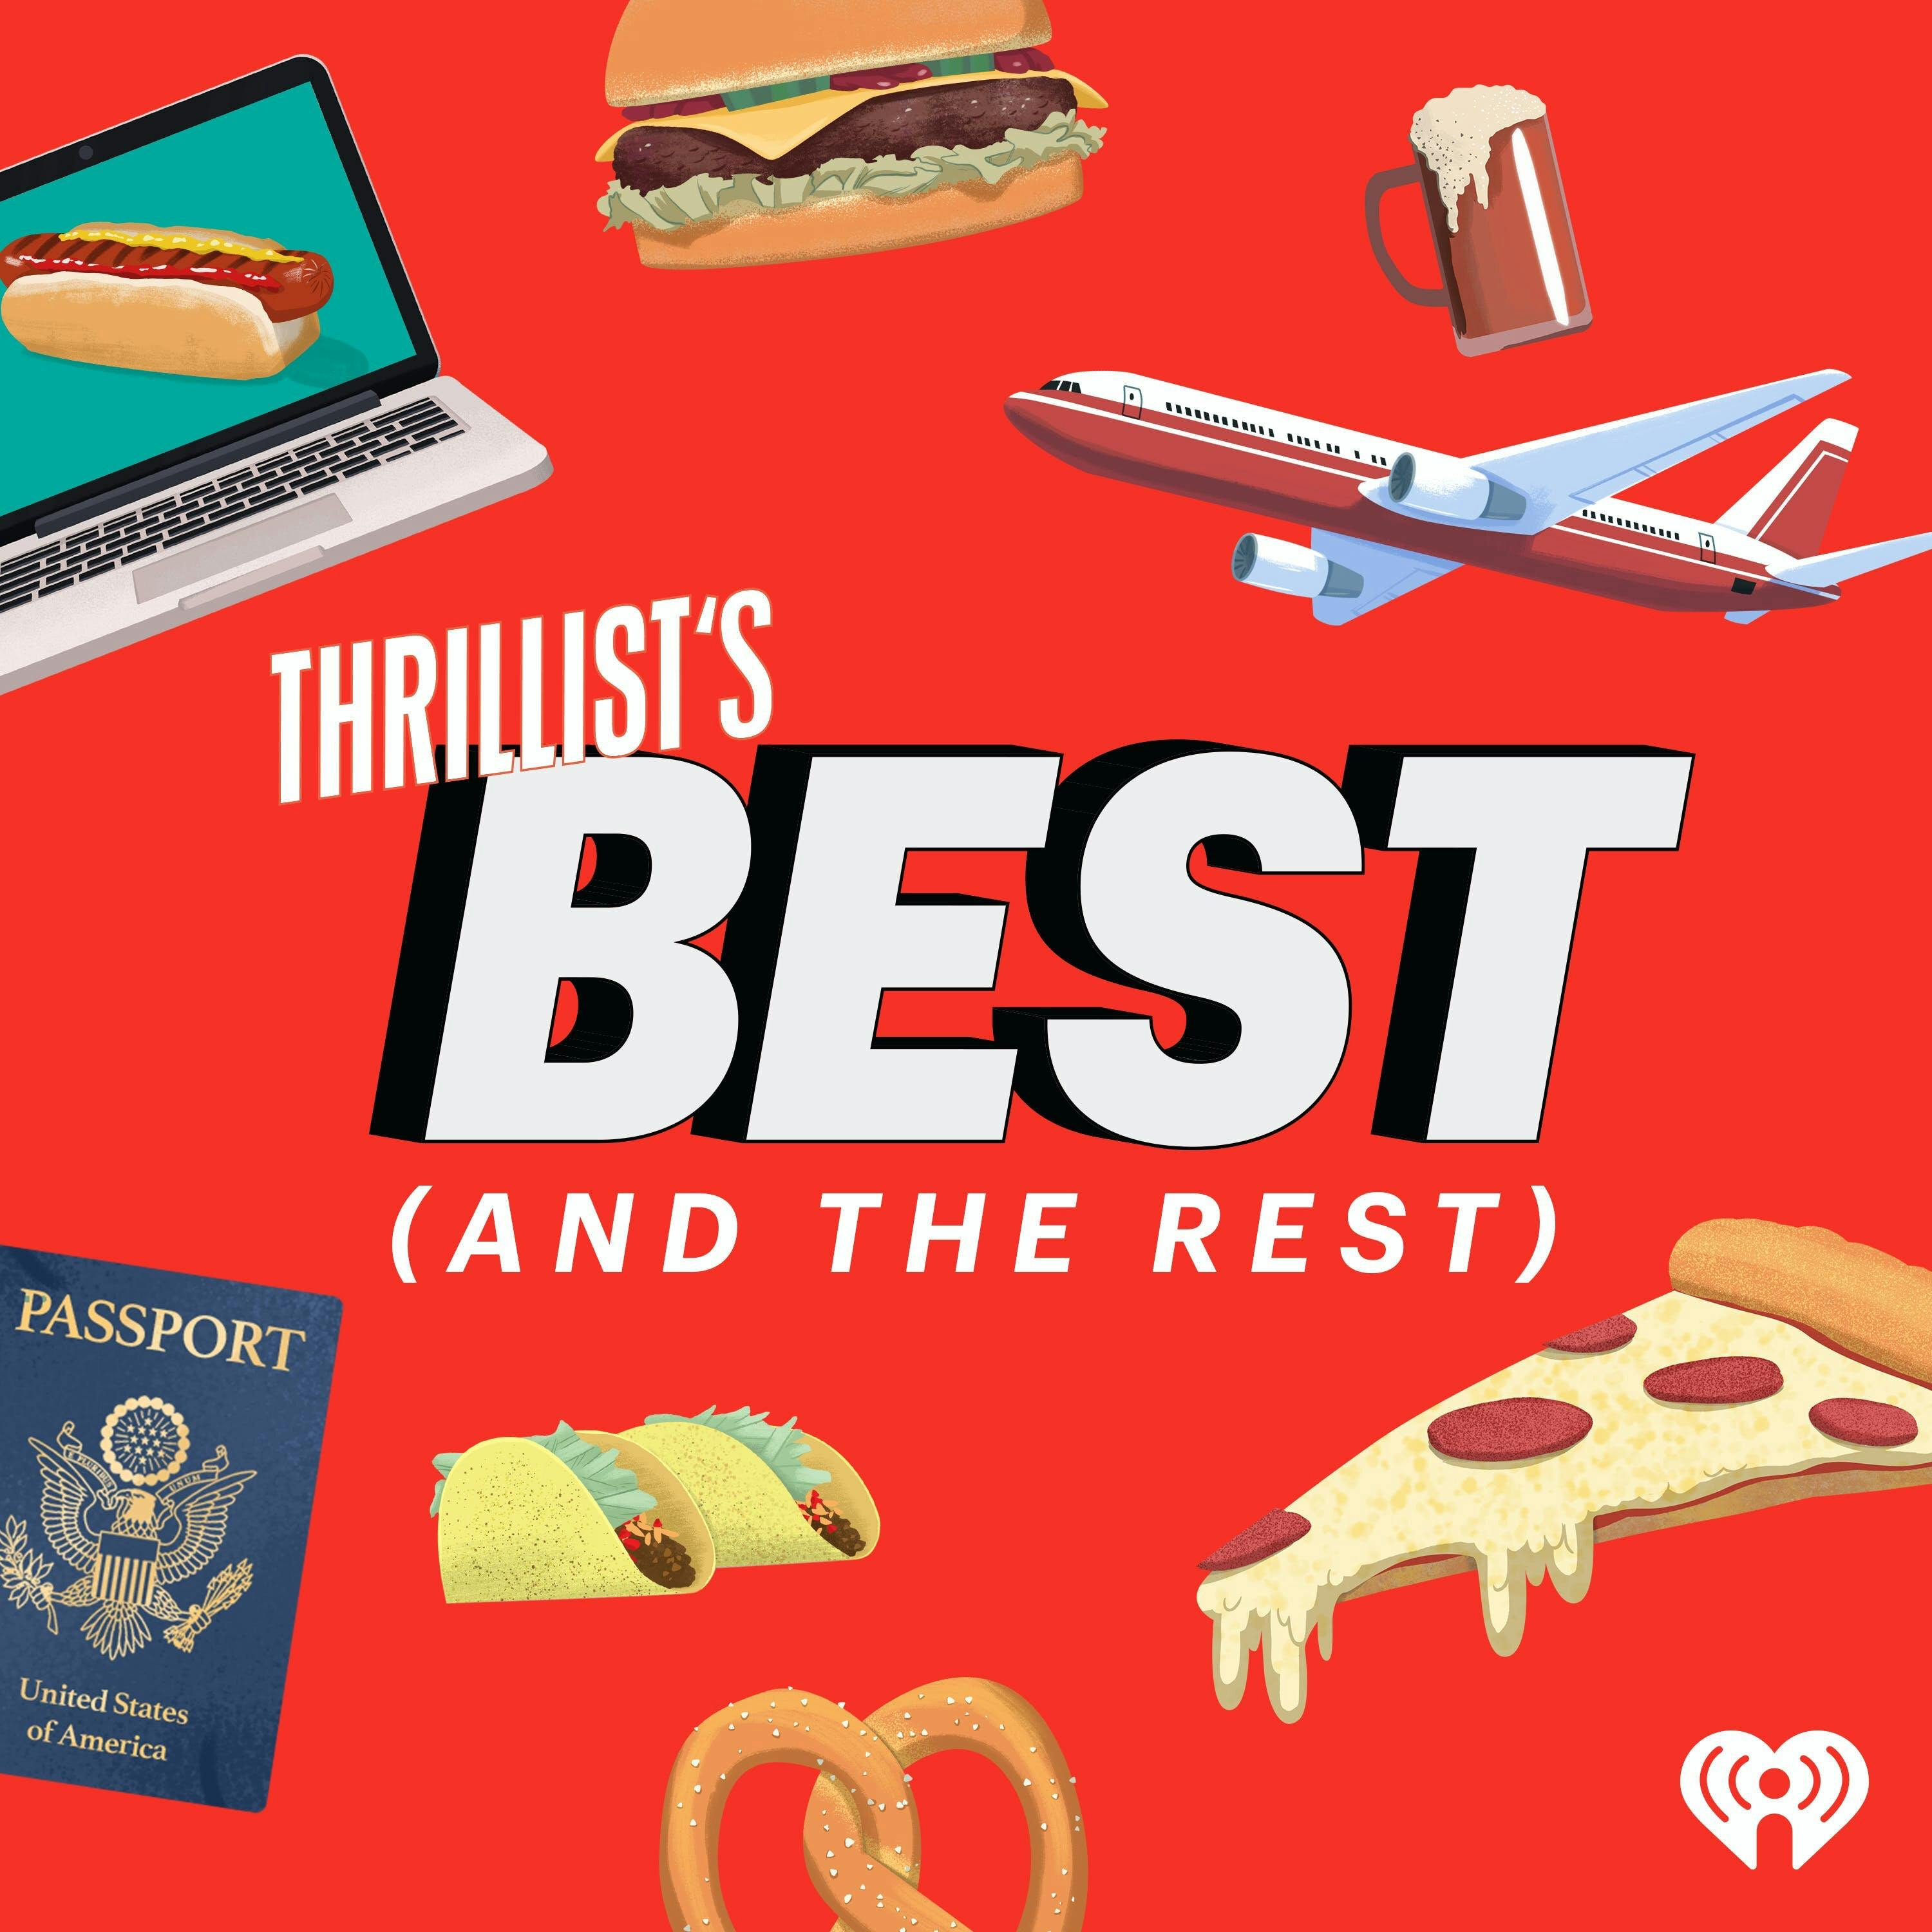 THRILLIST'S BEST: In 2020, It’s All About Simplicity